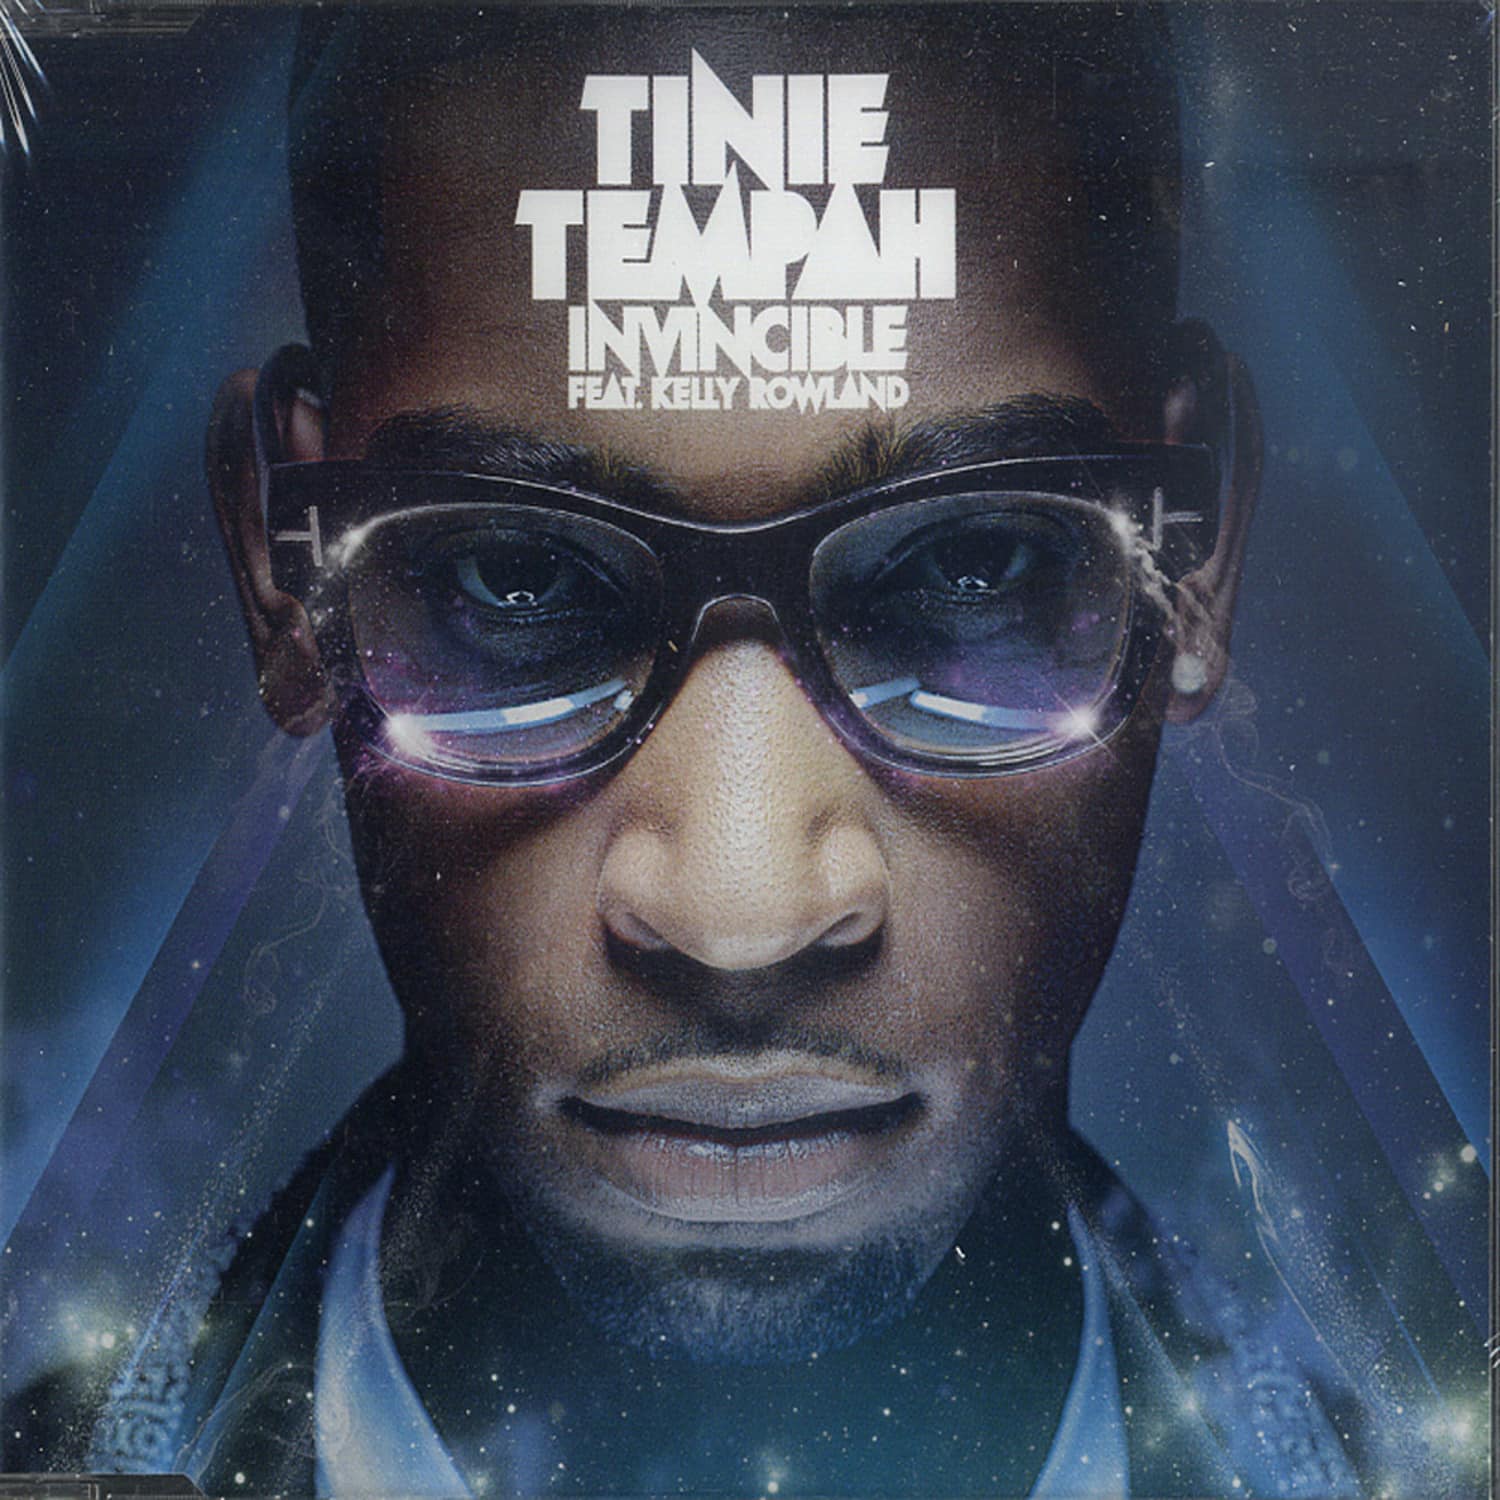 Tinie Tempah feat. Kelly Rowland - INVINCIBLE 